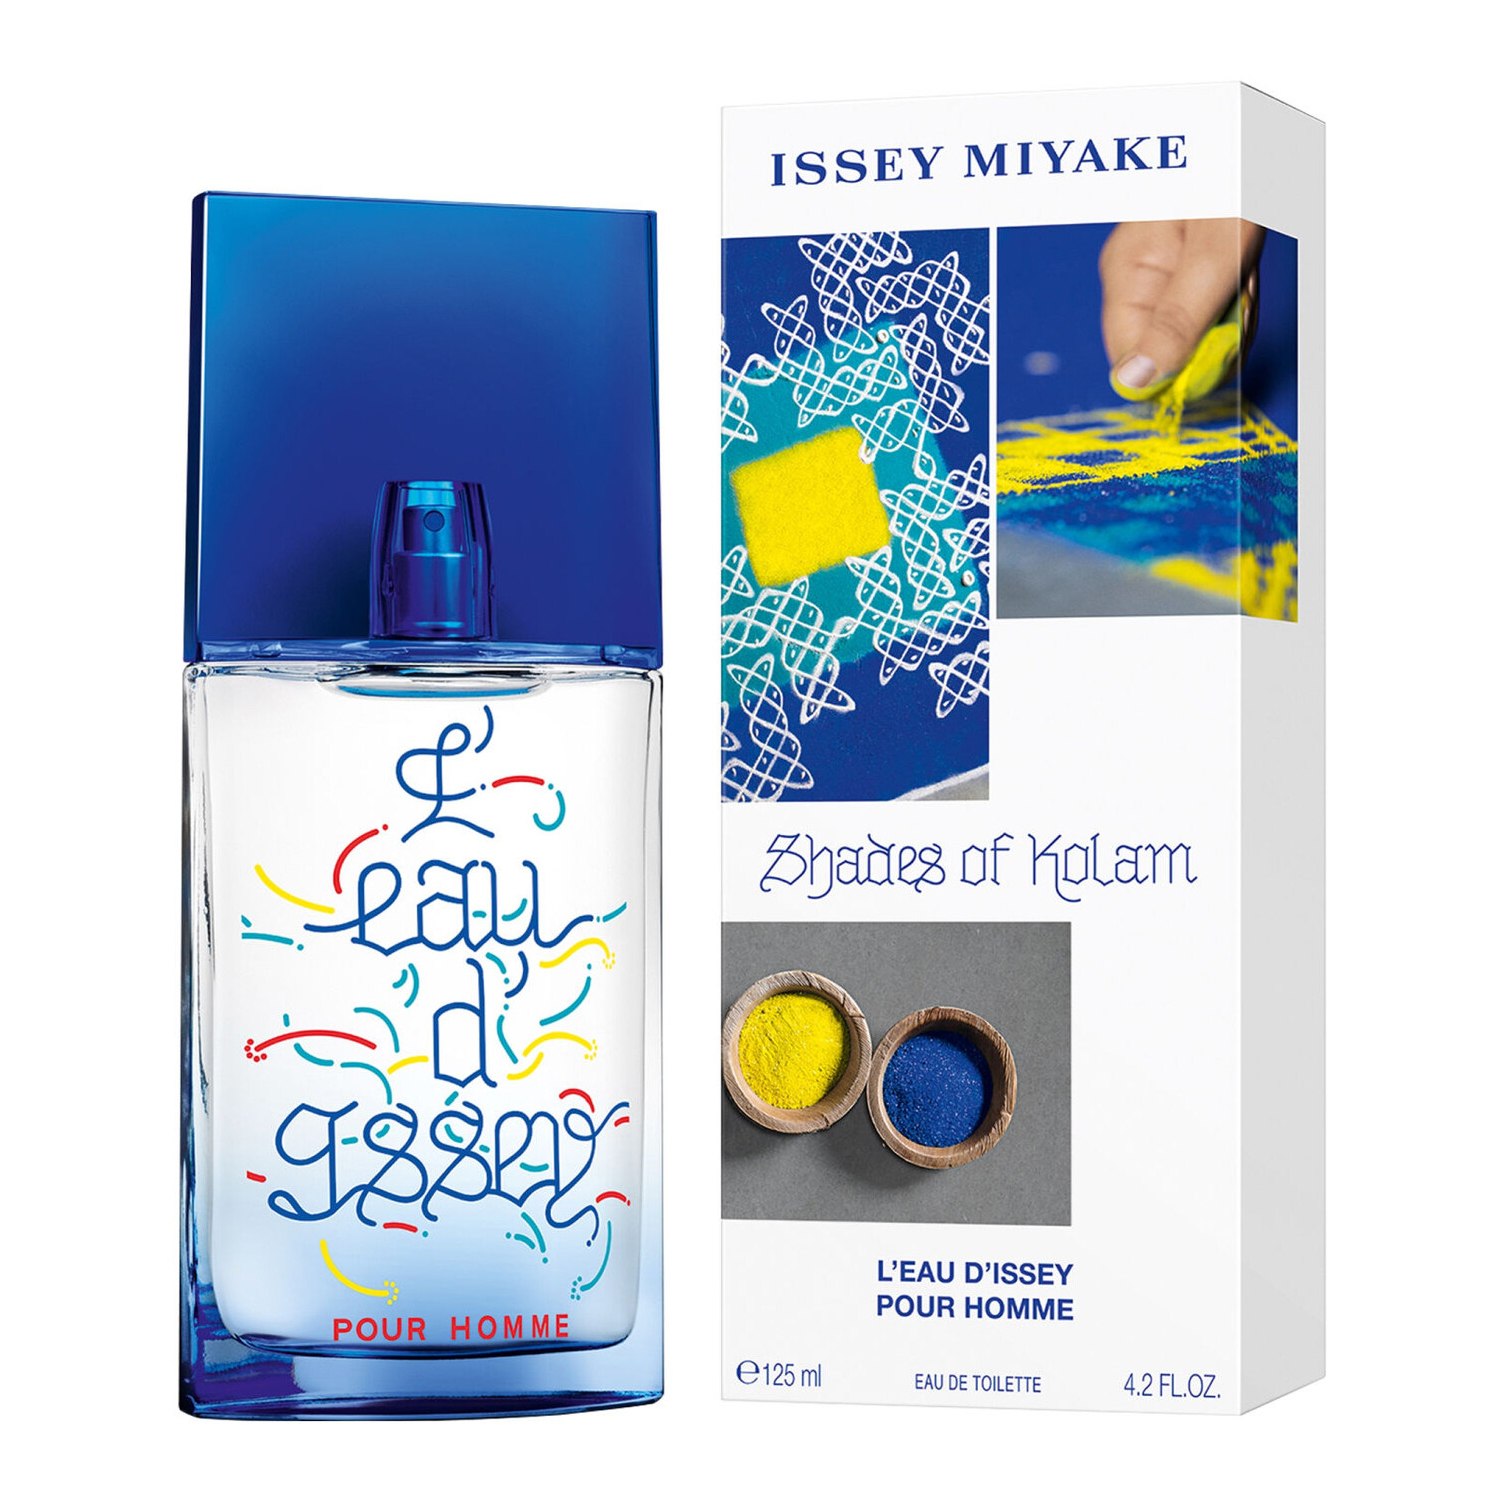 Issey Miyake L'Eau d'Issey Pour Homme Shades of Kolam, edt 125ml